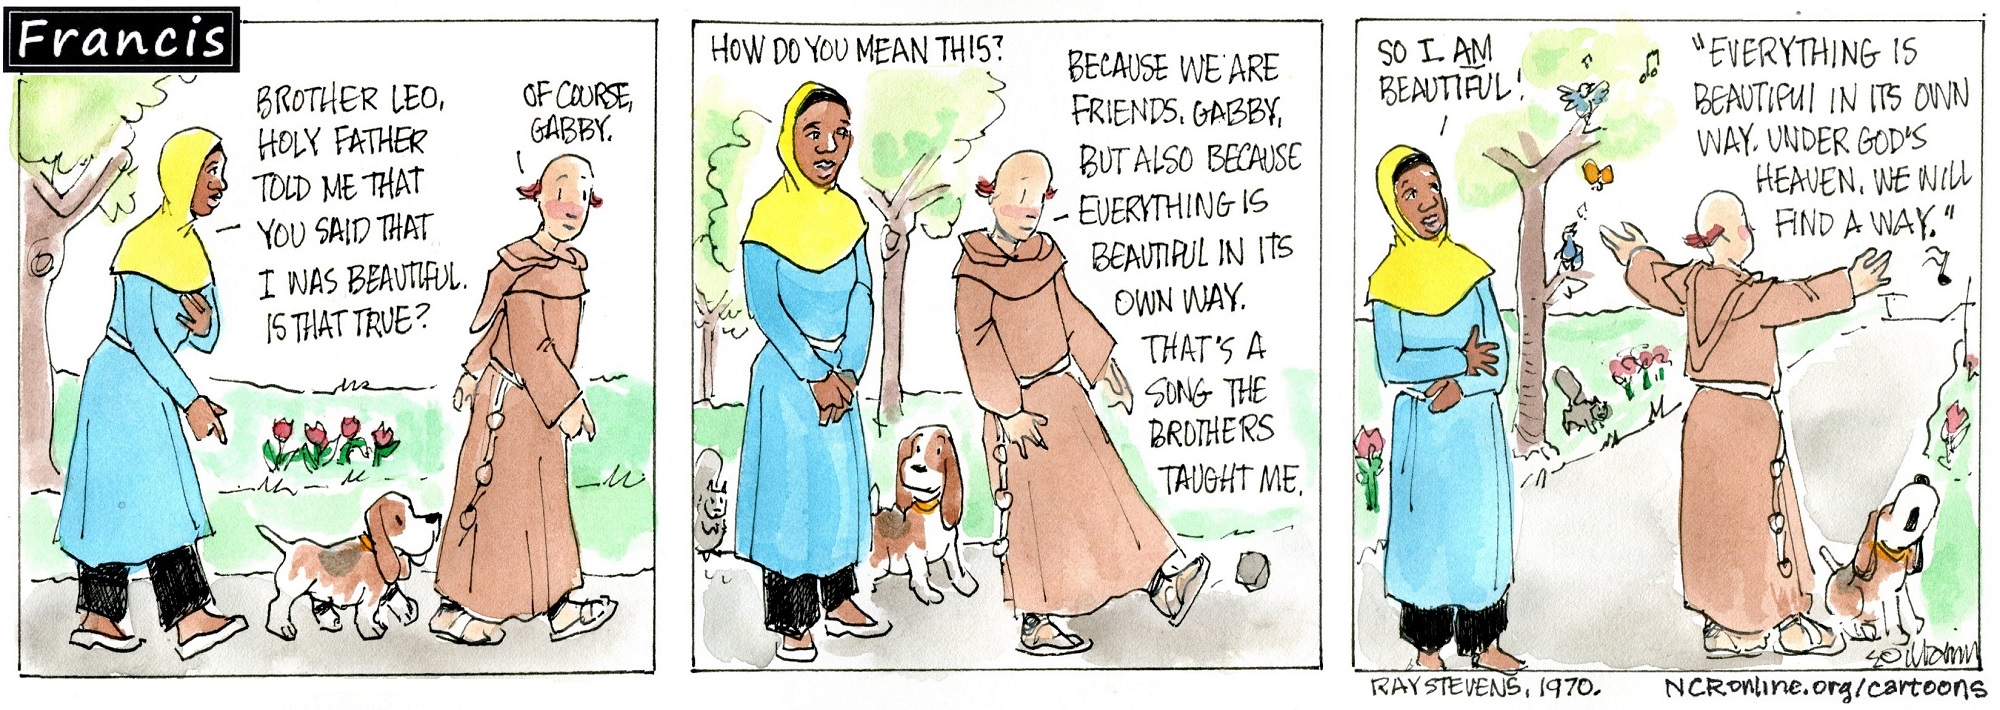 Francis, the comic strip: Brother Leo sees the beauty in everything, all around us.